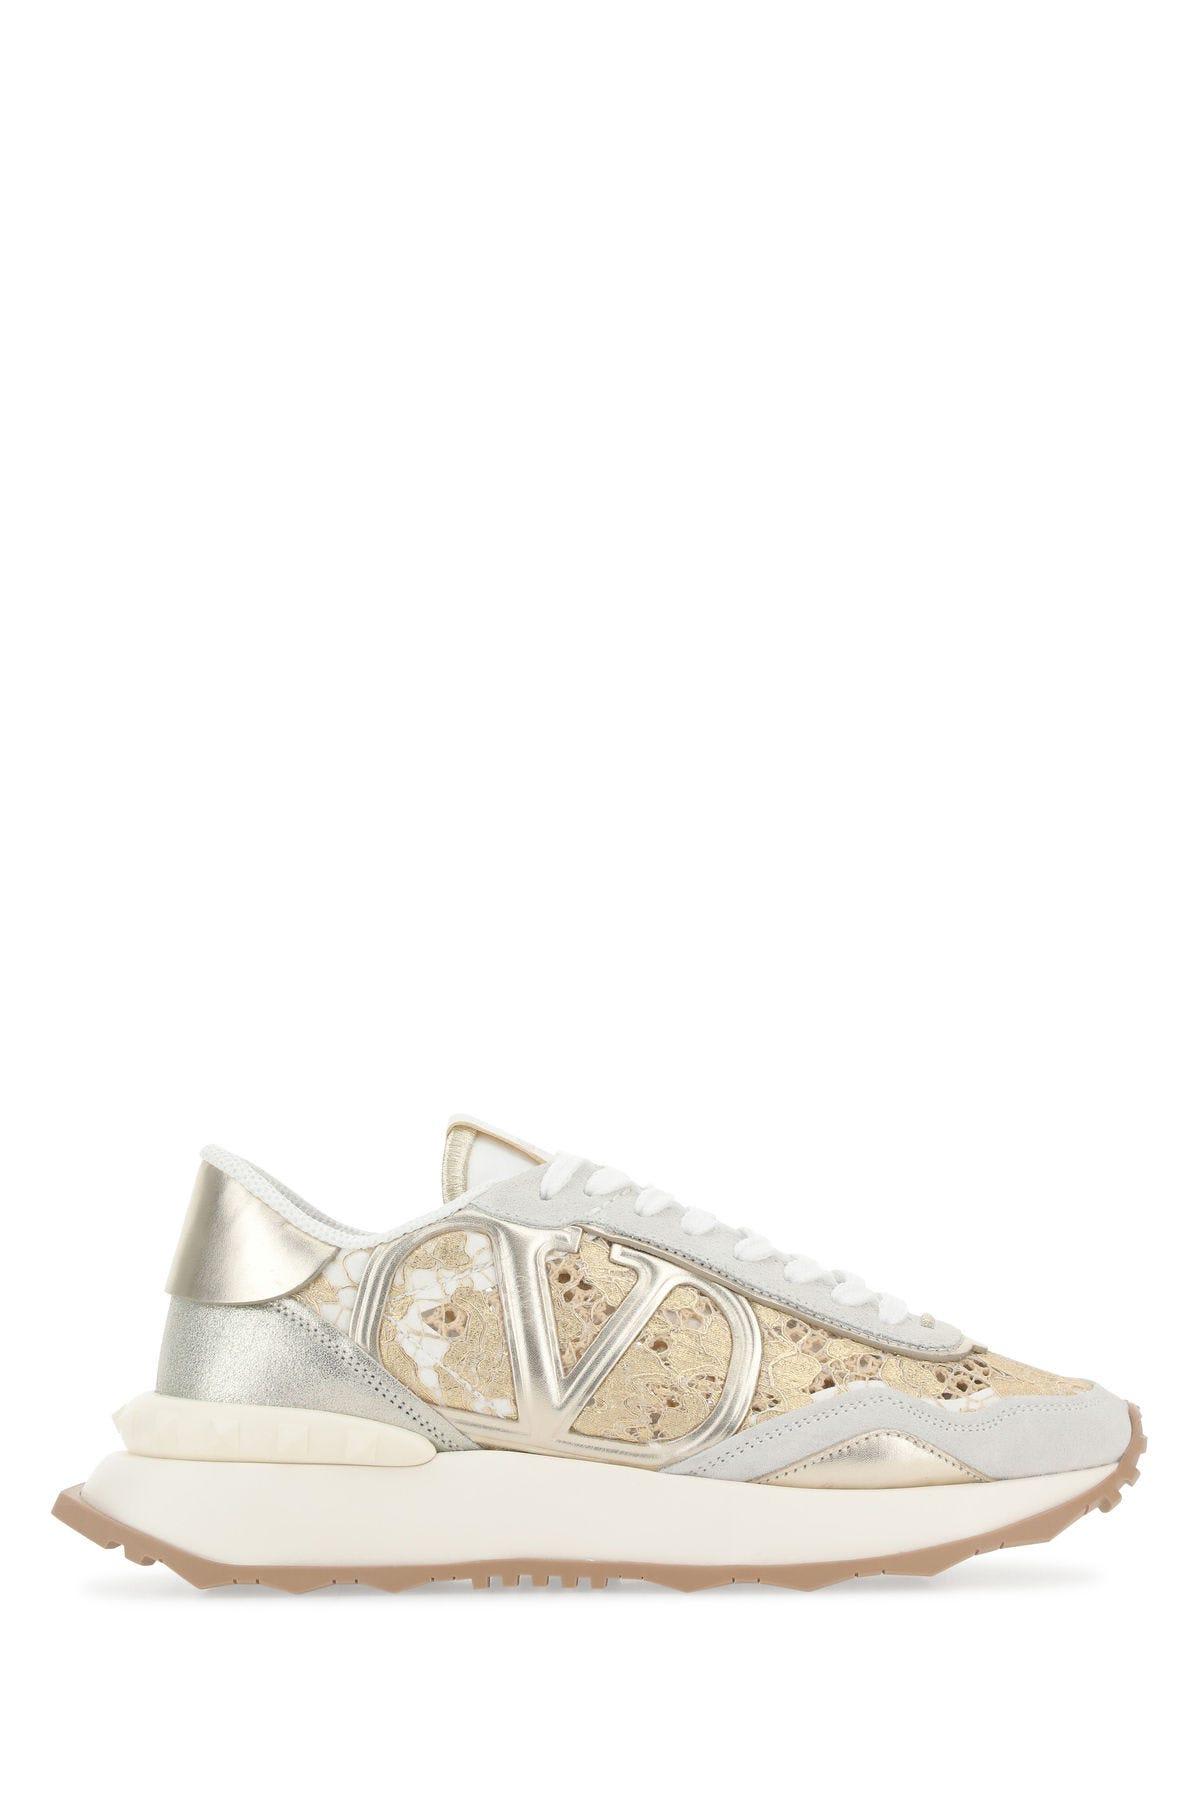 VALENTINO GARAVANI MULTICOLOR LACE AND LEATHER LACERUNNER SNEAKERS